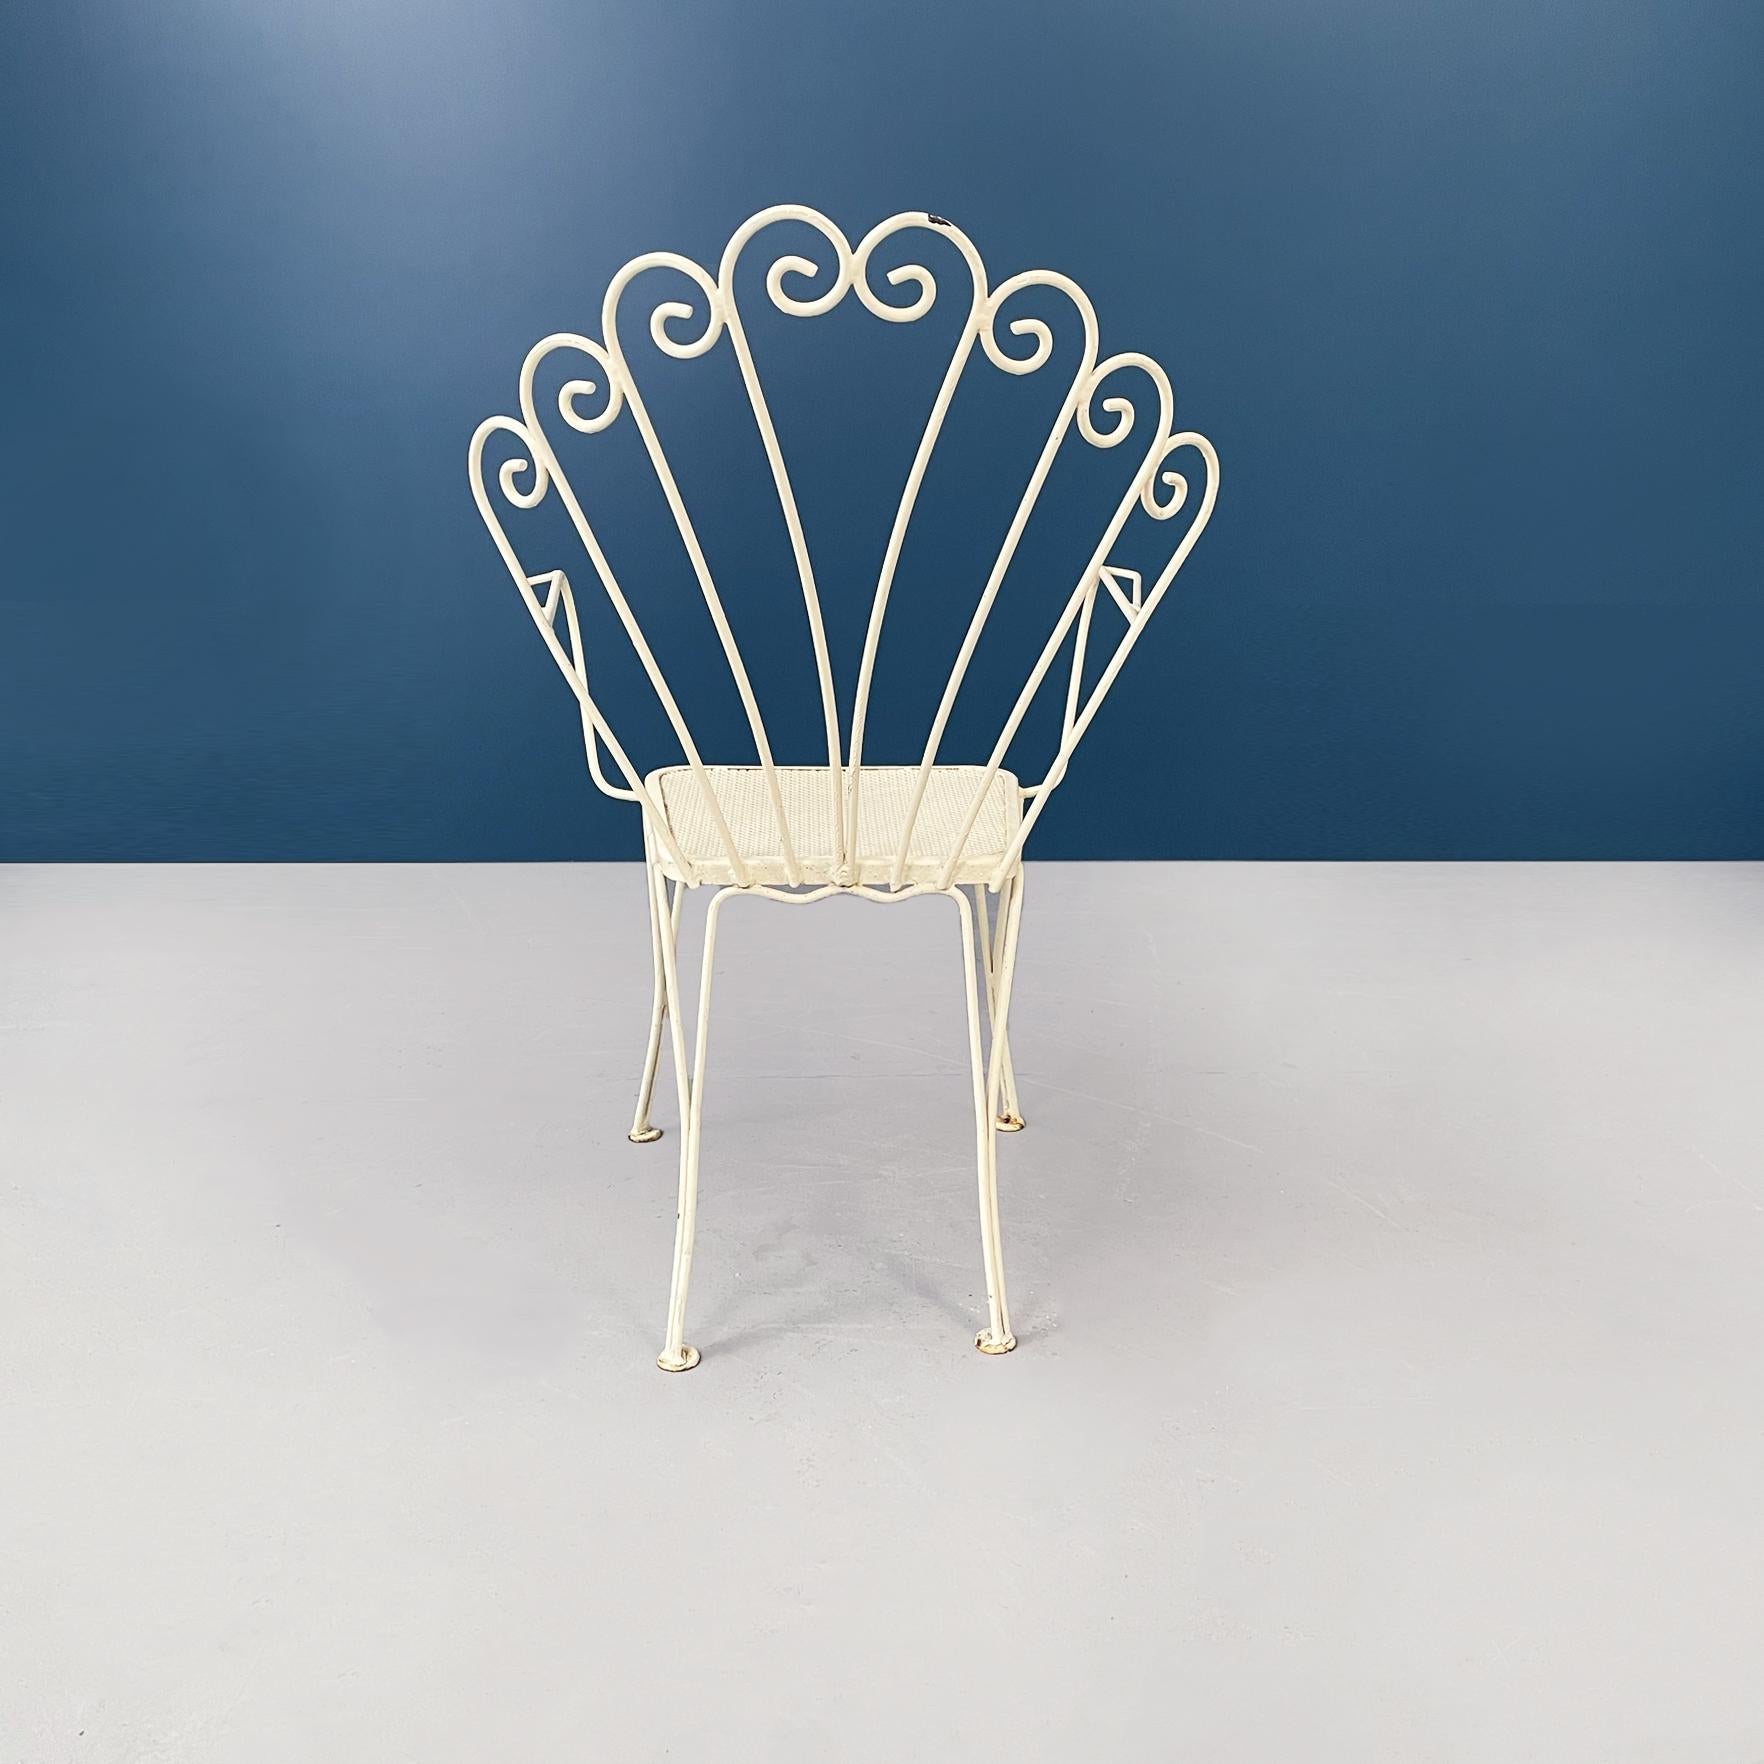 Mid-20th Century Italian Mid-Century Modern Garden Chairs and Table in White Wrought Iron, 1960s For Sale